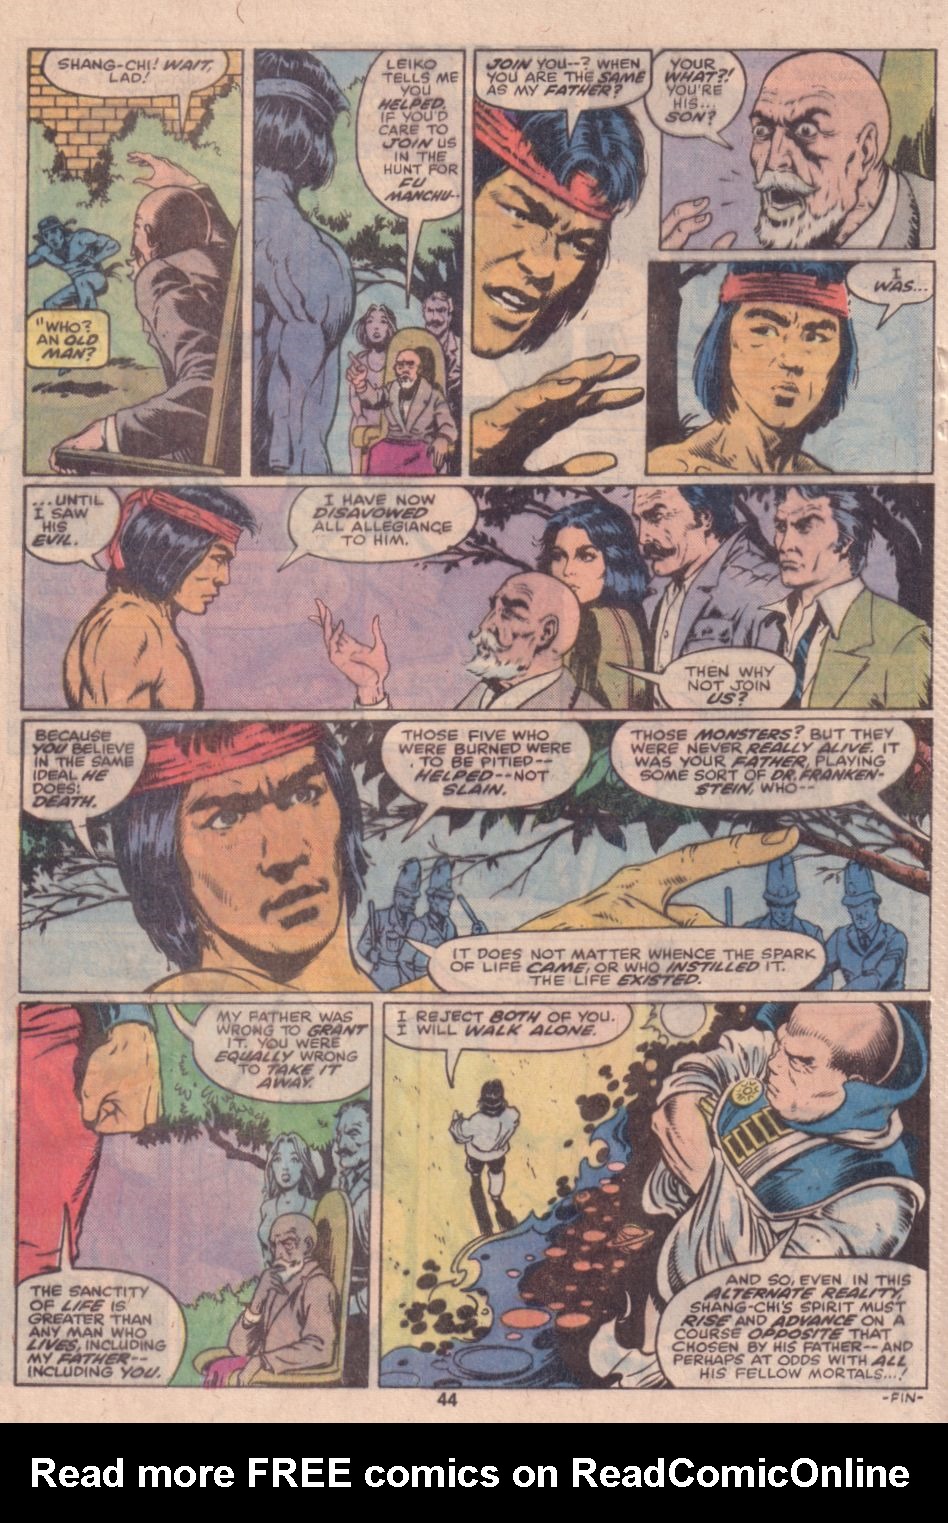 What If? (1977) issue 16 - Shang Chi Master of Kung Fu fought on The side of Fu Manchu - Page 34